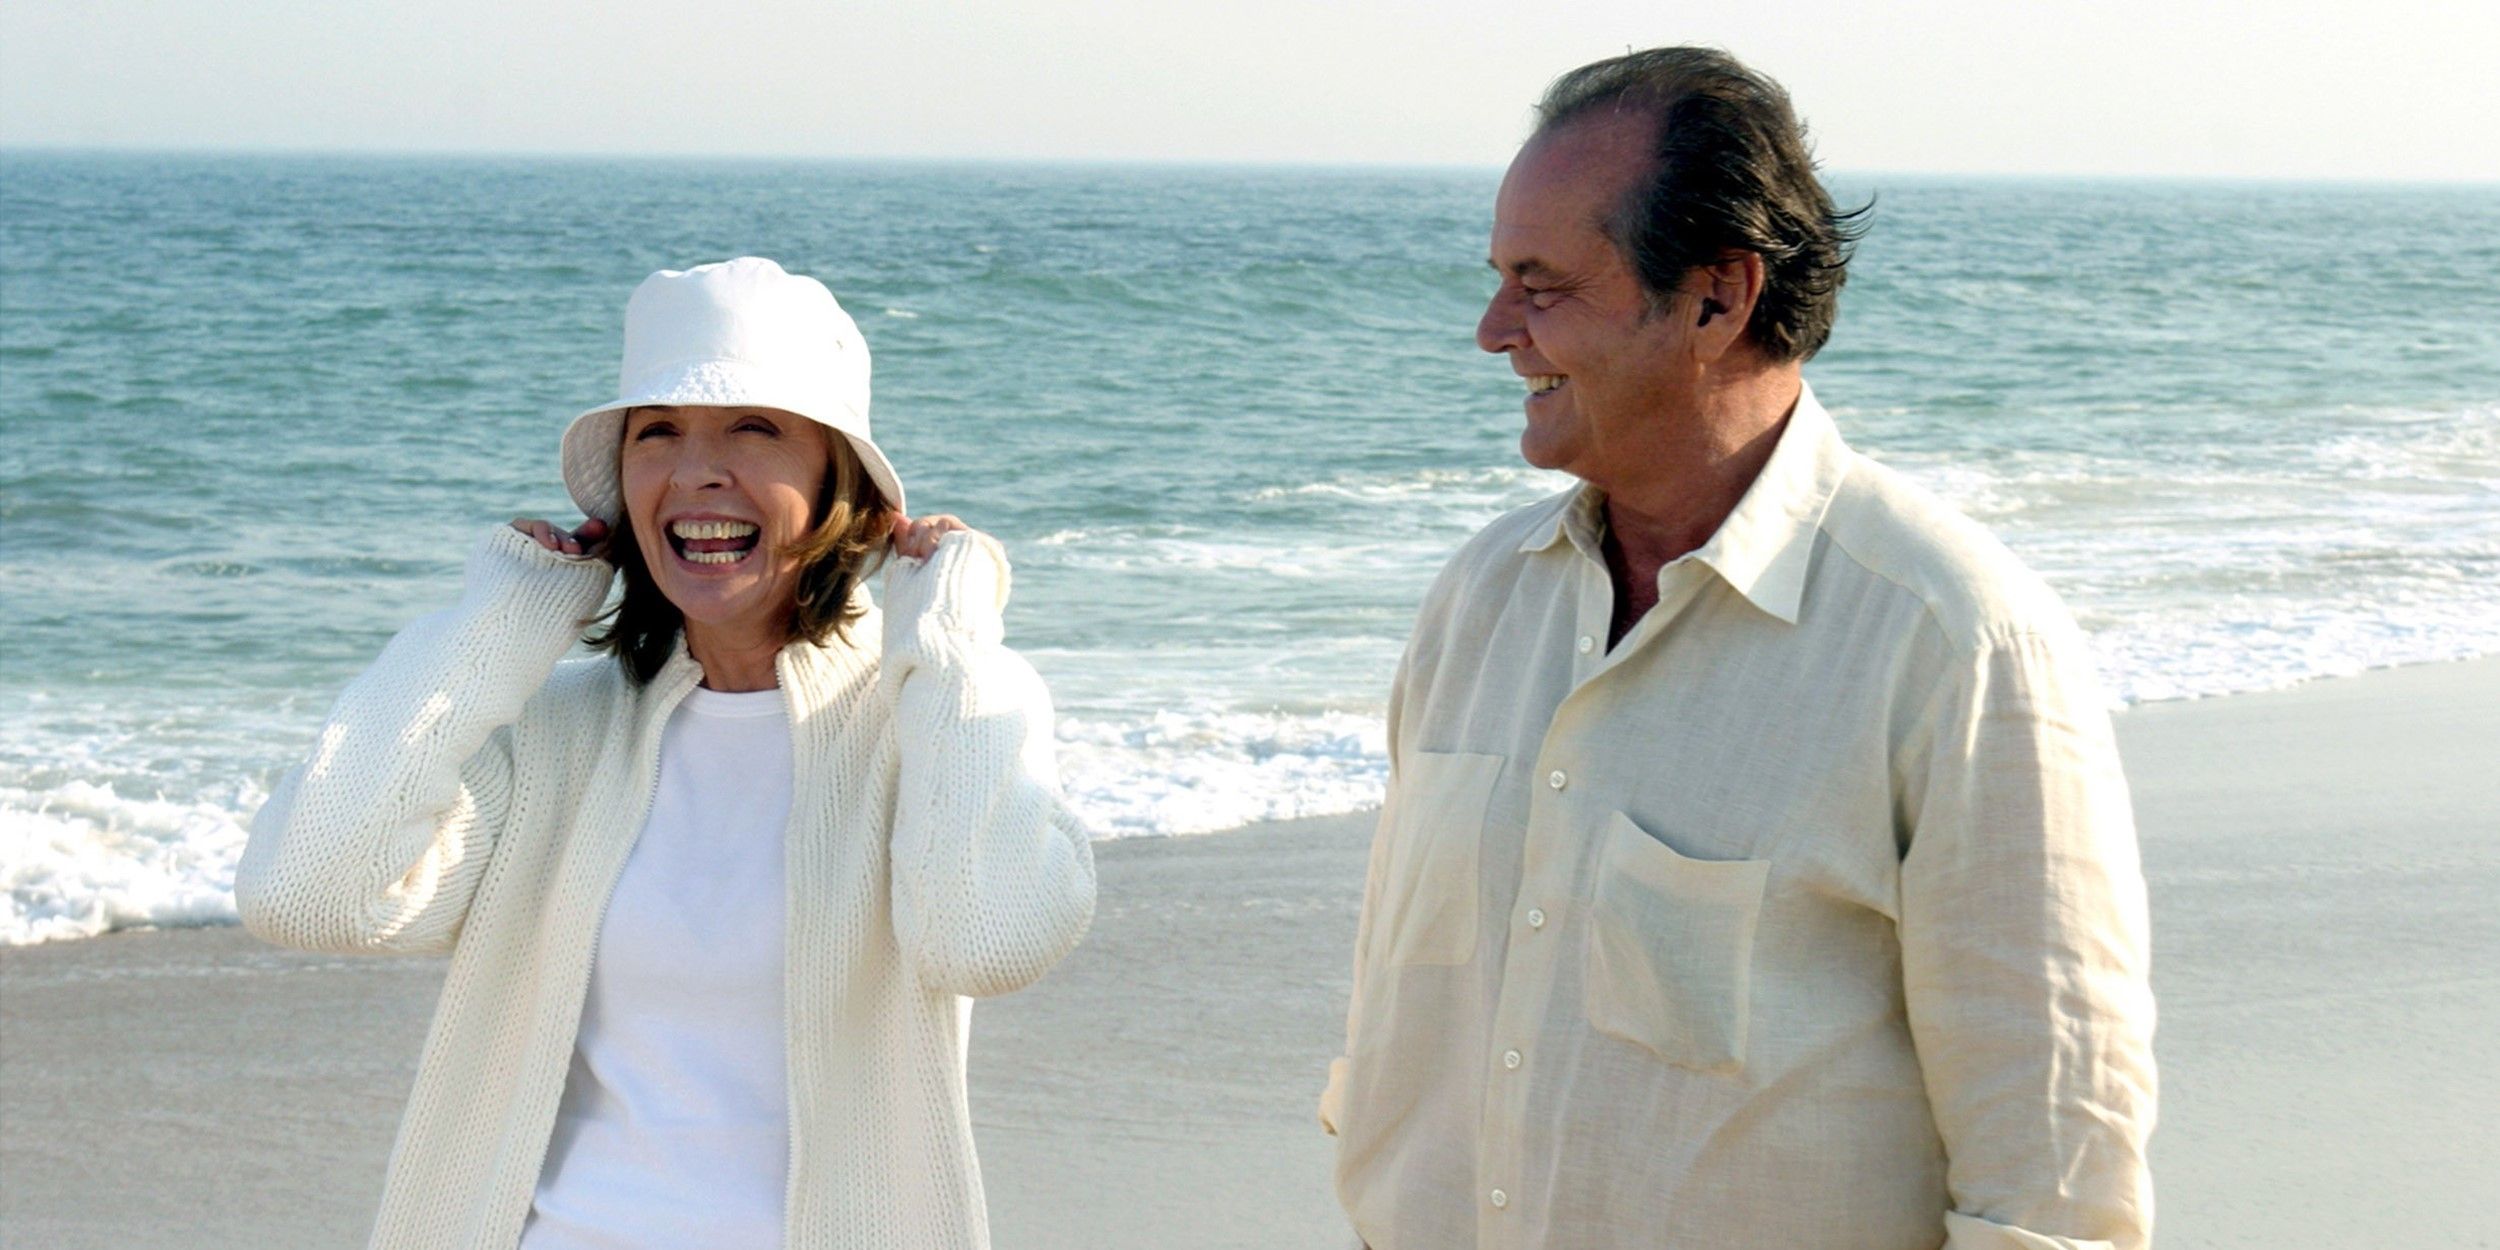 Erica and Harry walk together in the beach in Something’s Gotta Give